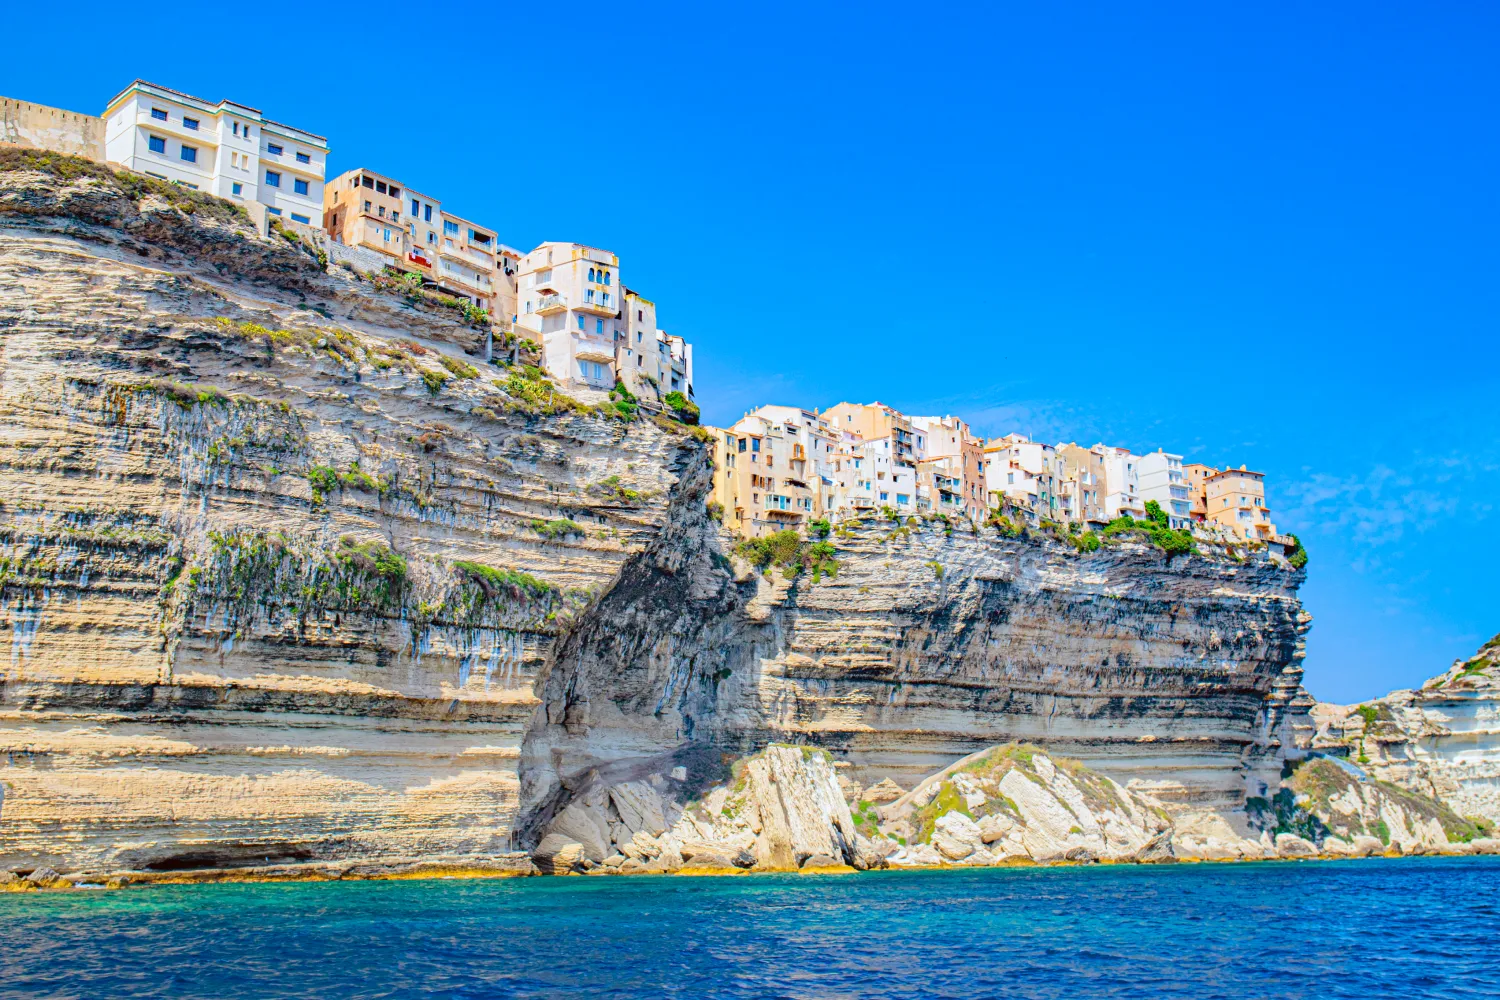 dramatic view of The City Of Bonifacio, the city of cliffs, In Corsica, built on rising rocks from the sea